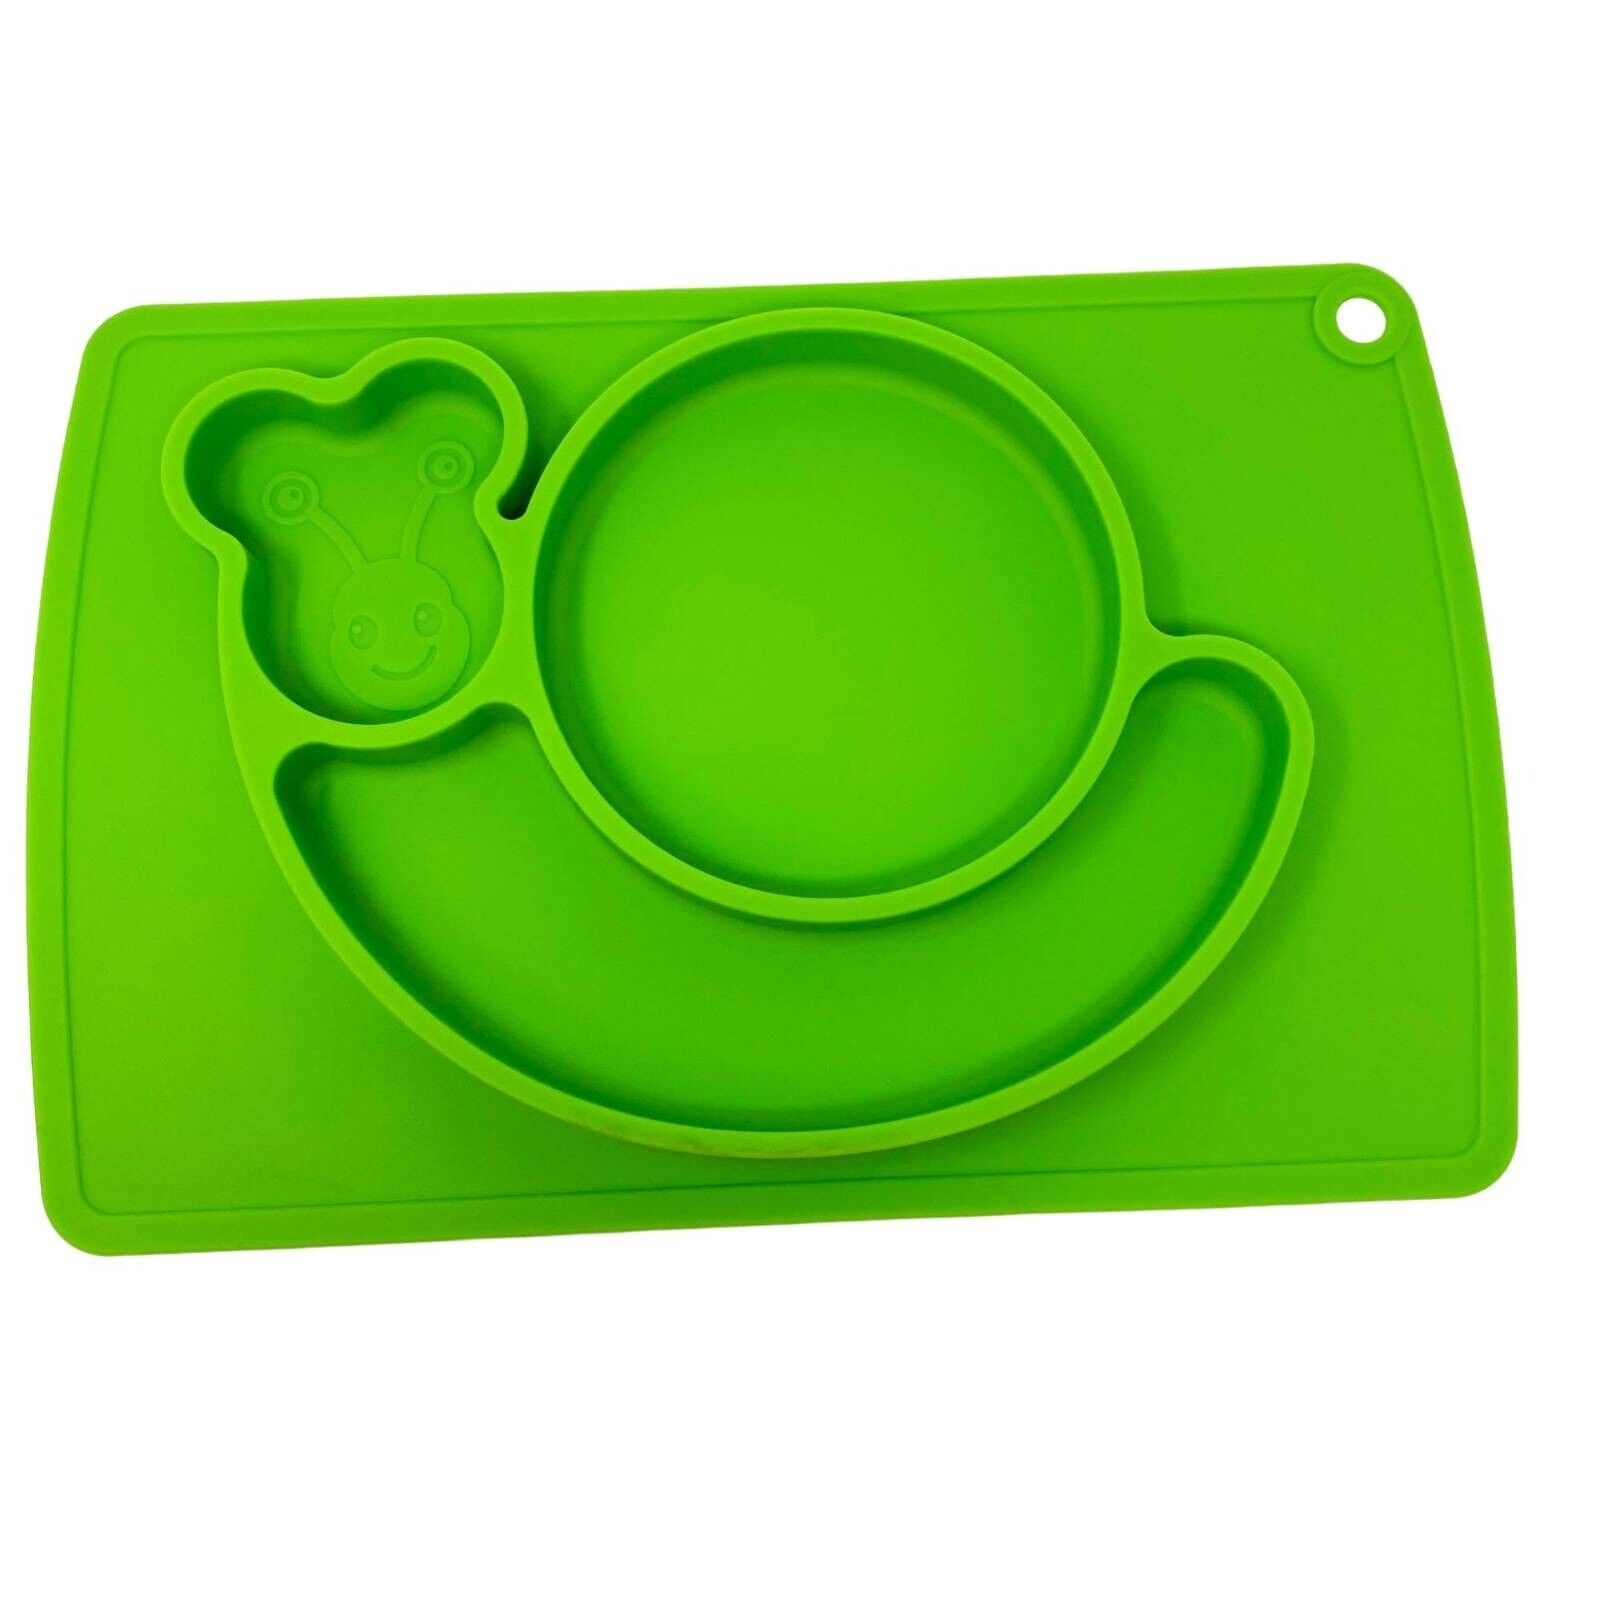 Silicone Plate Baby Toddler Kids Food Grade Green Placemat Cute Snail New